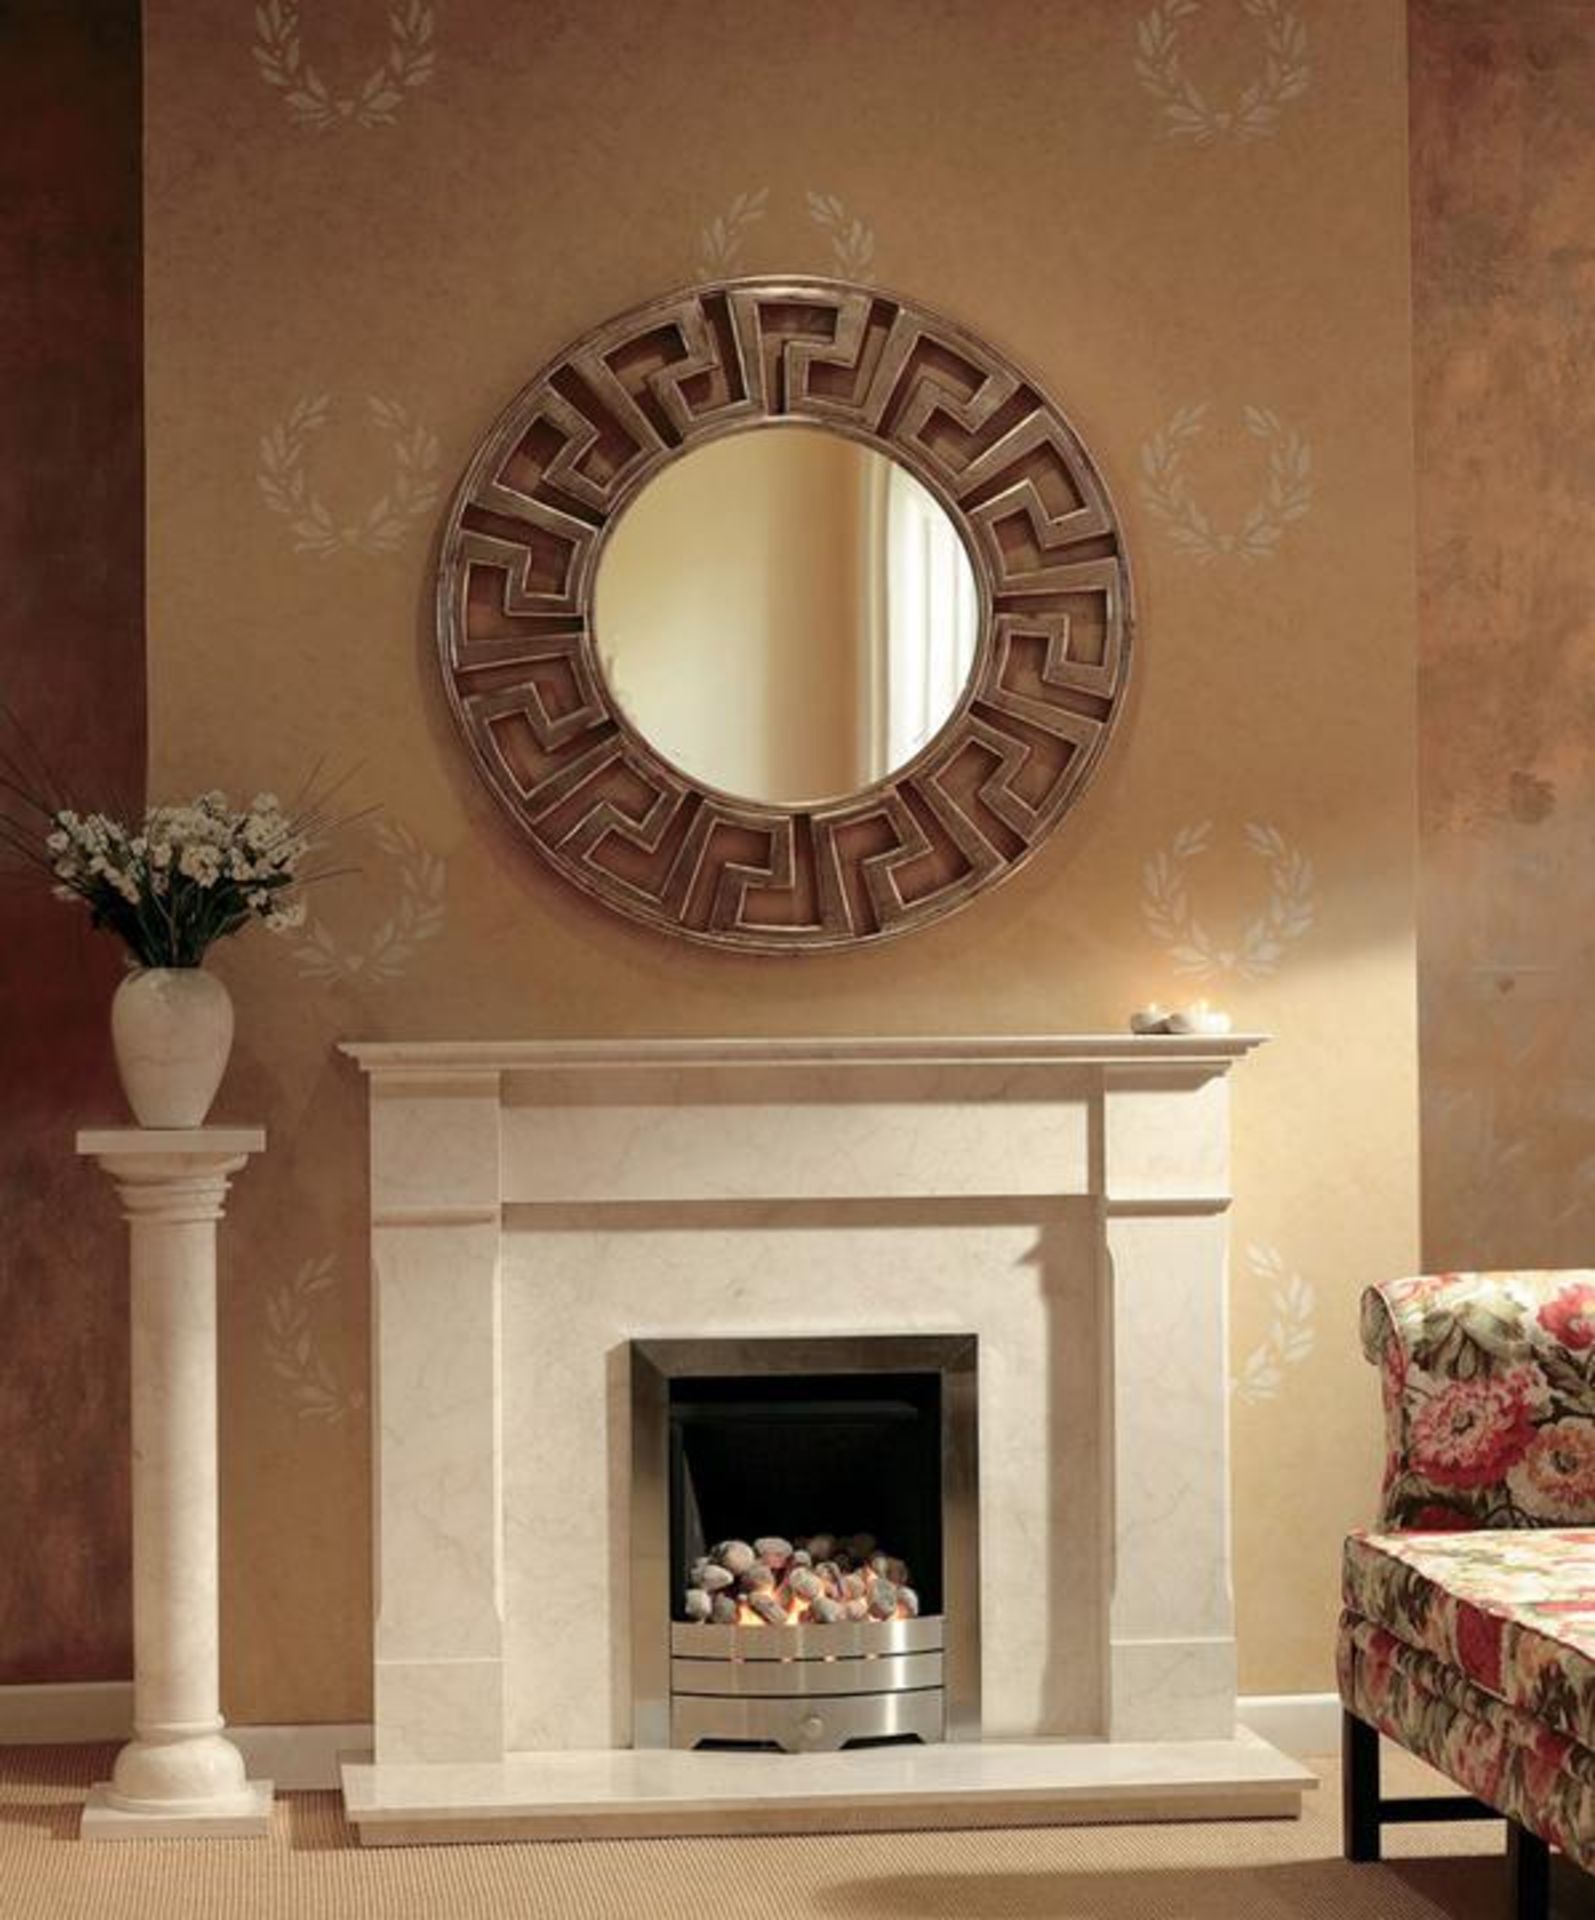 BRAND NEW MONTPELLIER FIRE SURROUND, EVITA 48 INCH BIANCO, The Evita fireplace is our take on a